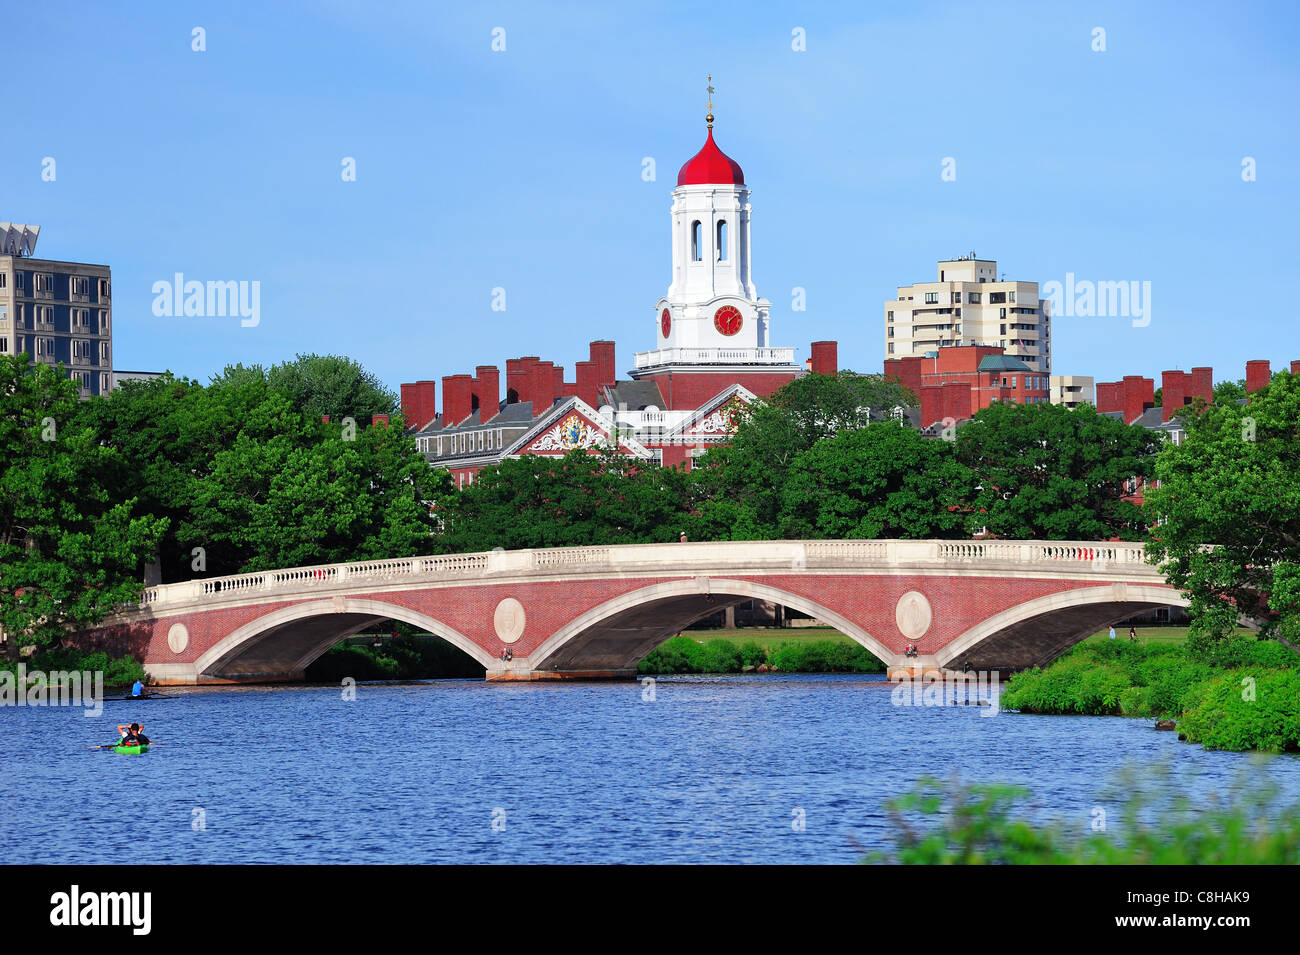 John W. Weeks Bridge and clock tower over Charles River in Harvard University campus in Boston with trees, boat and blue sky. Stock Photo